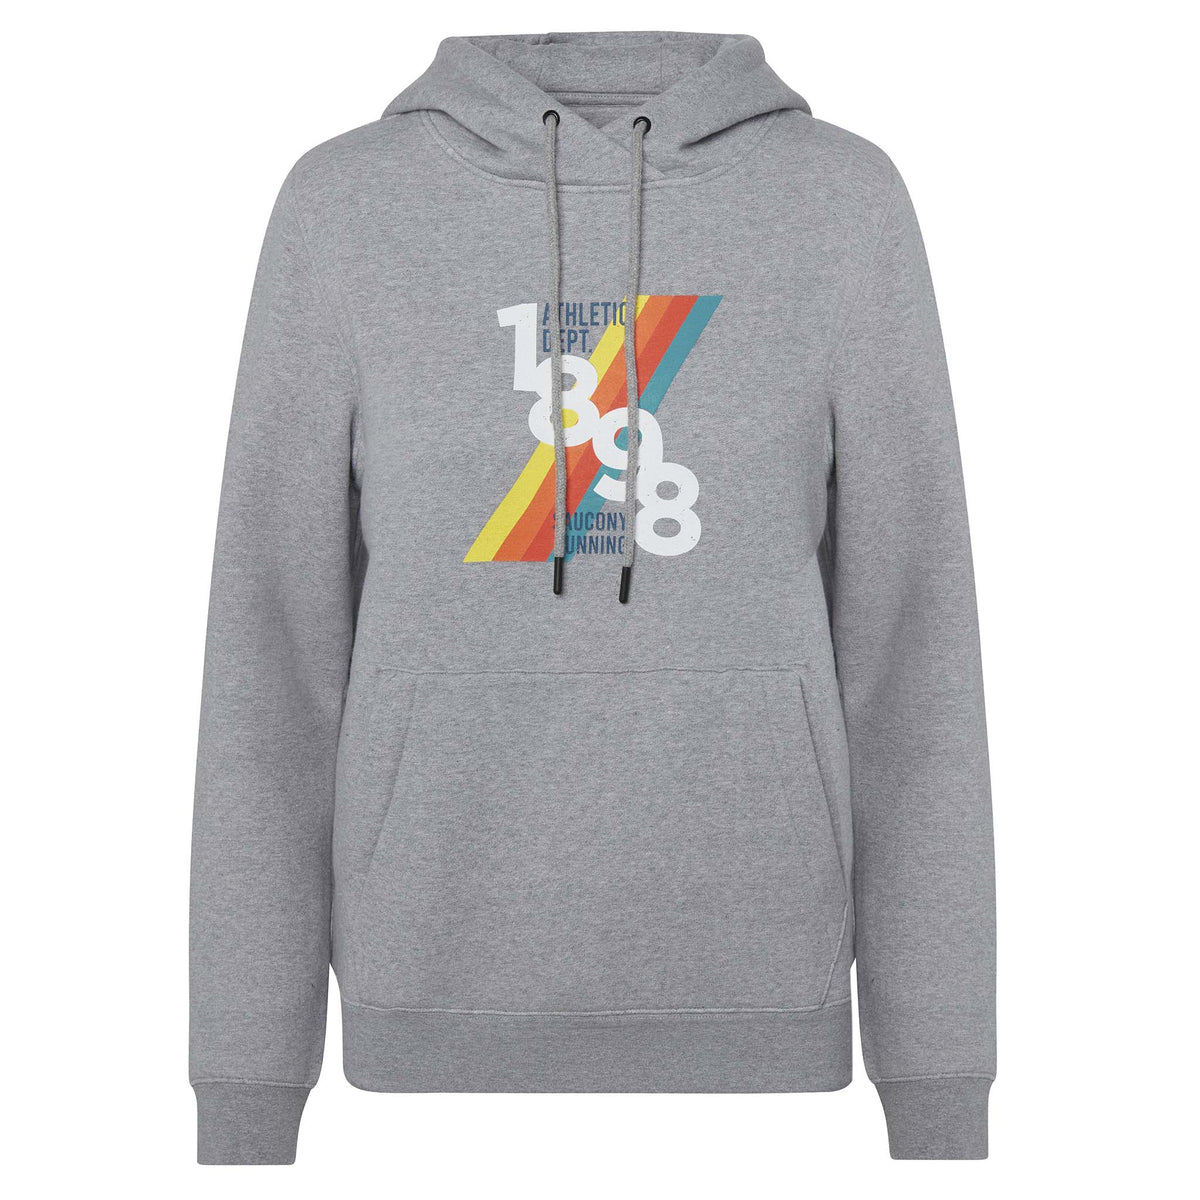 Saucony Rested Hoody kangourou a capuche gris femme